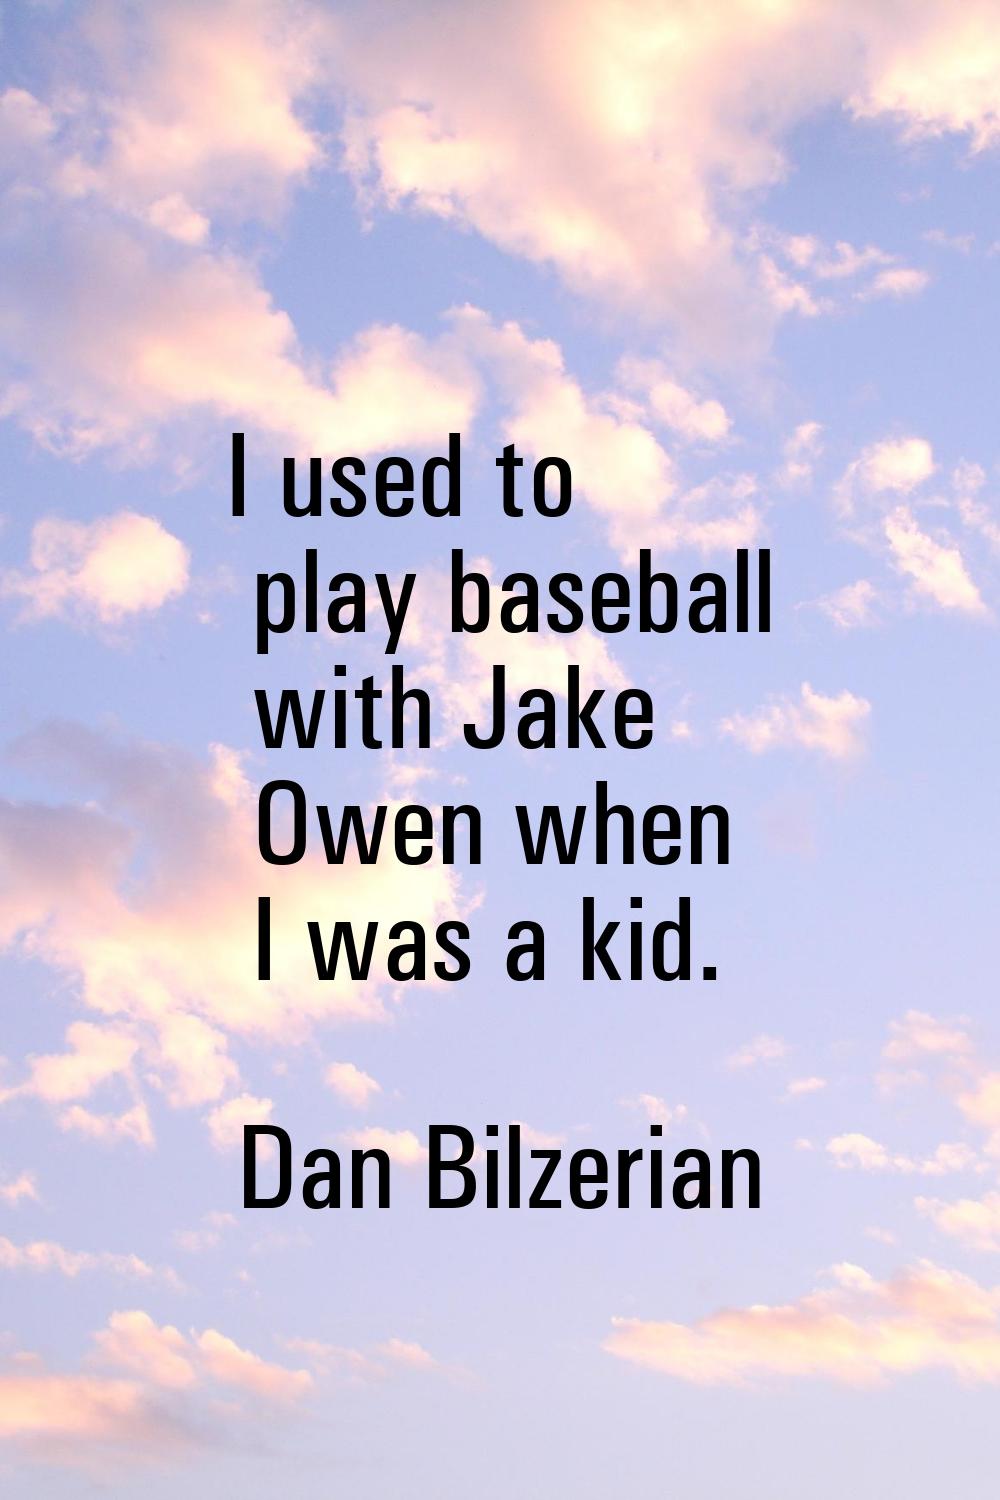 I used to play baseball with Jake Owen when I was a kid.